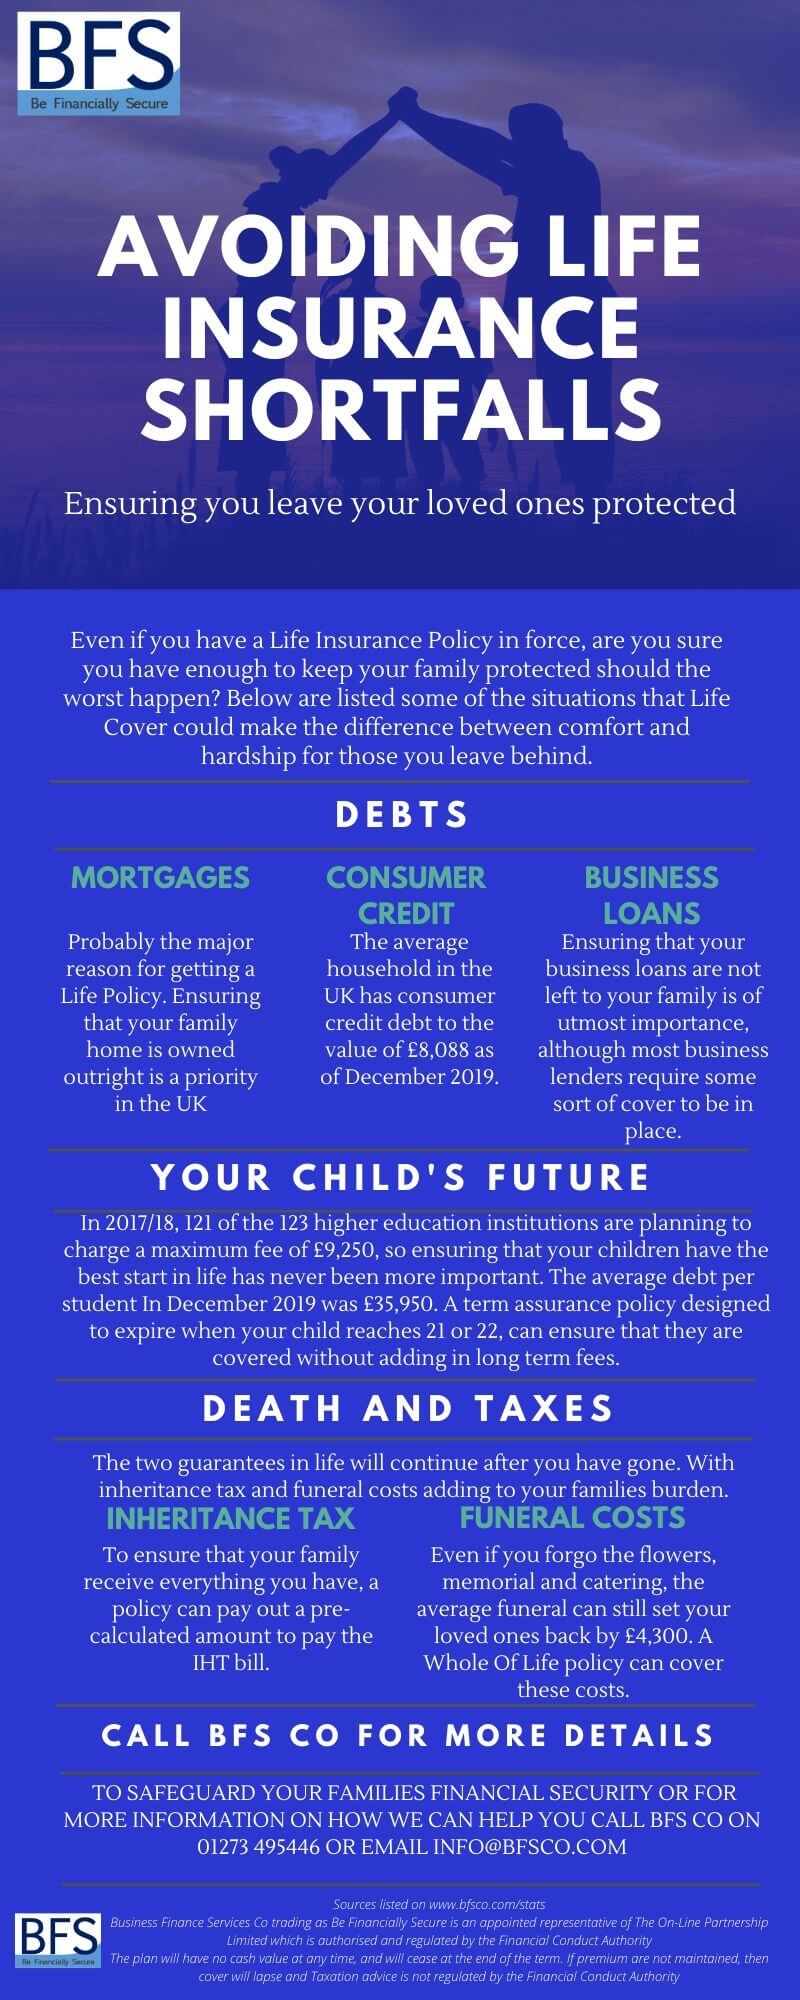 Life Insurance Shortfalls. Even if you have a Life Insurance Policy in force, are you sure you have enough to keep your family protected should the worst happen?